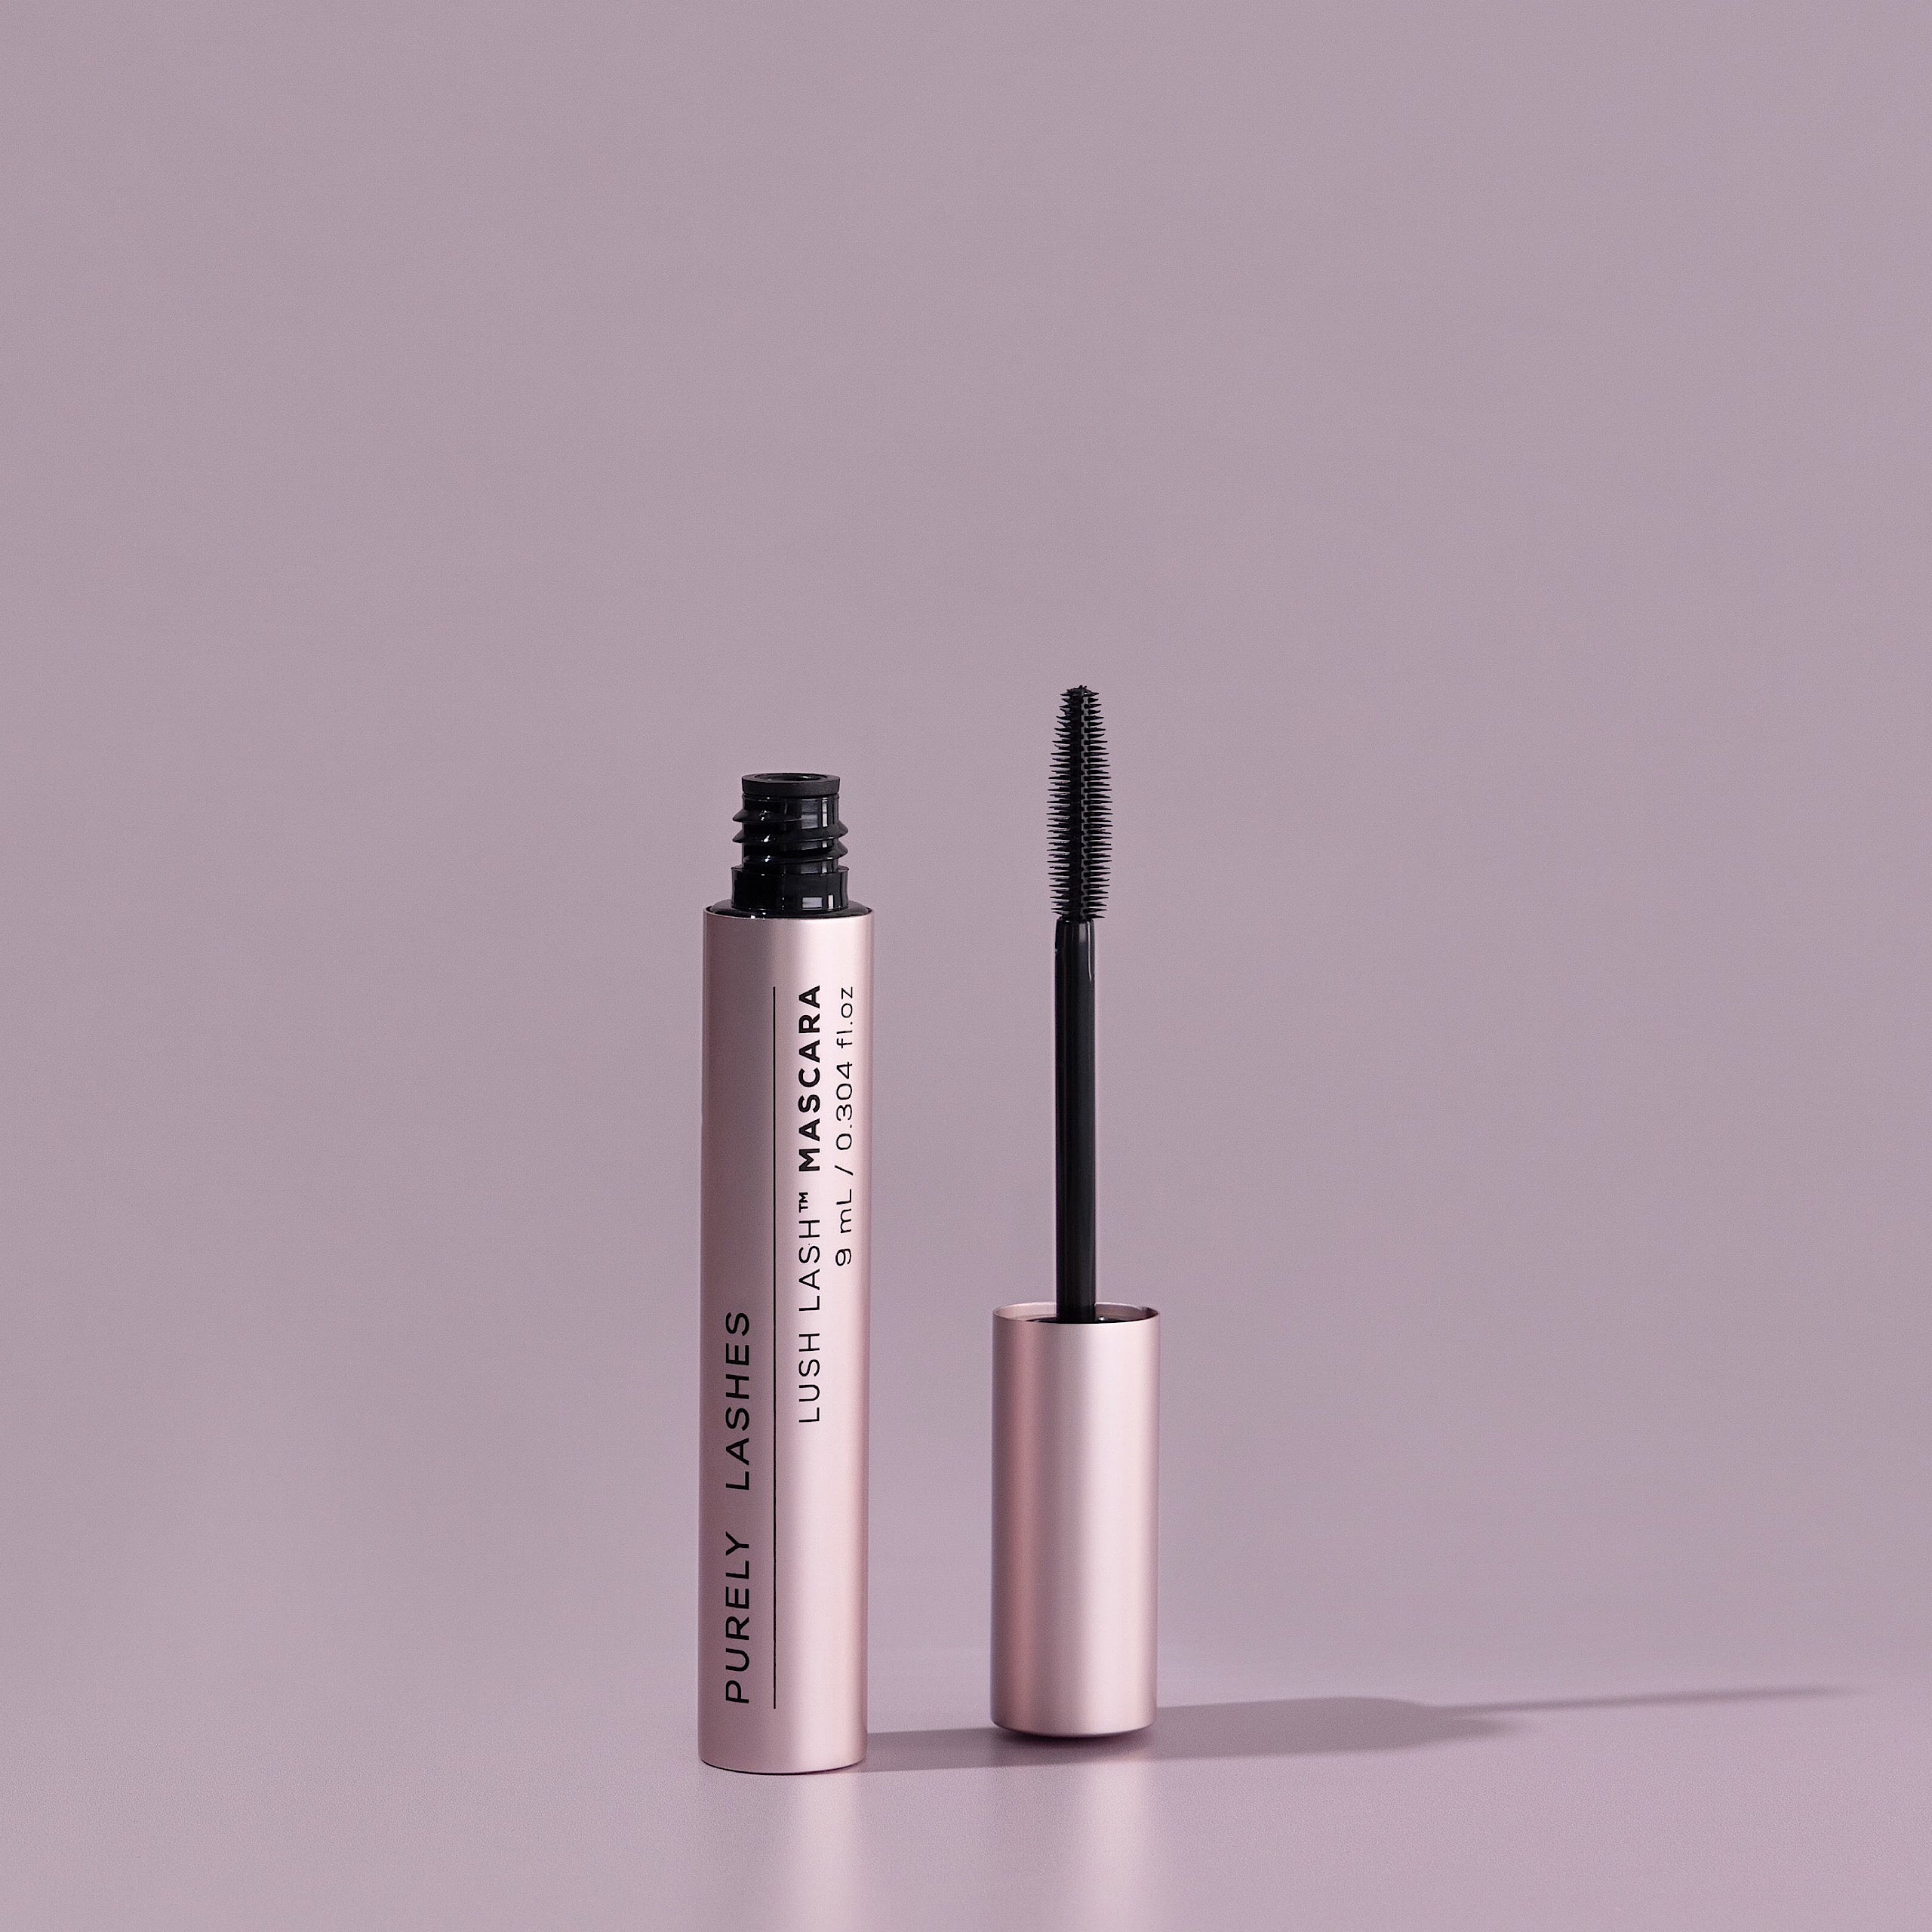 Lash Growth Mascara tube with the mascara brush applicator sitting beside out of the bottle